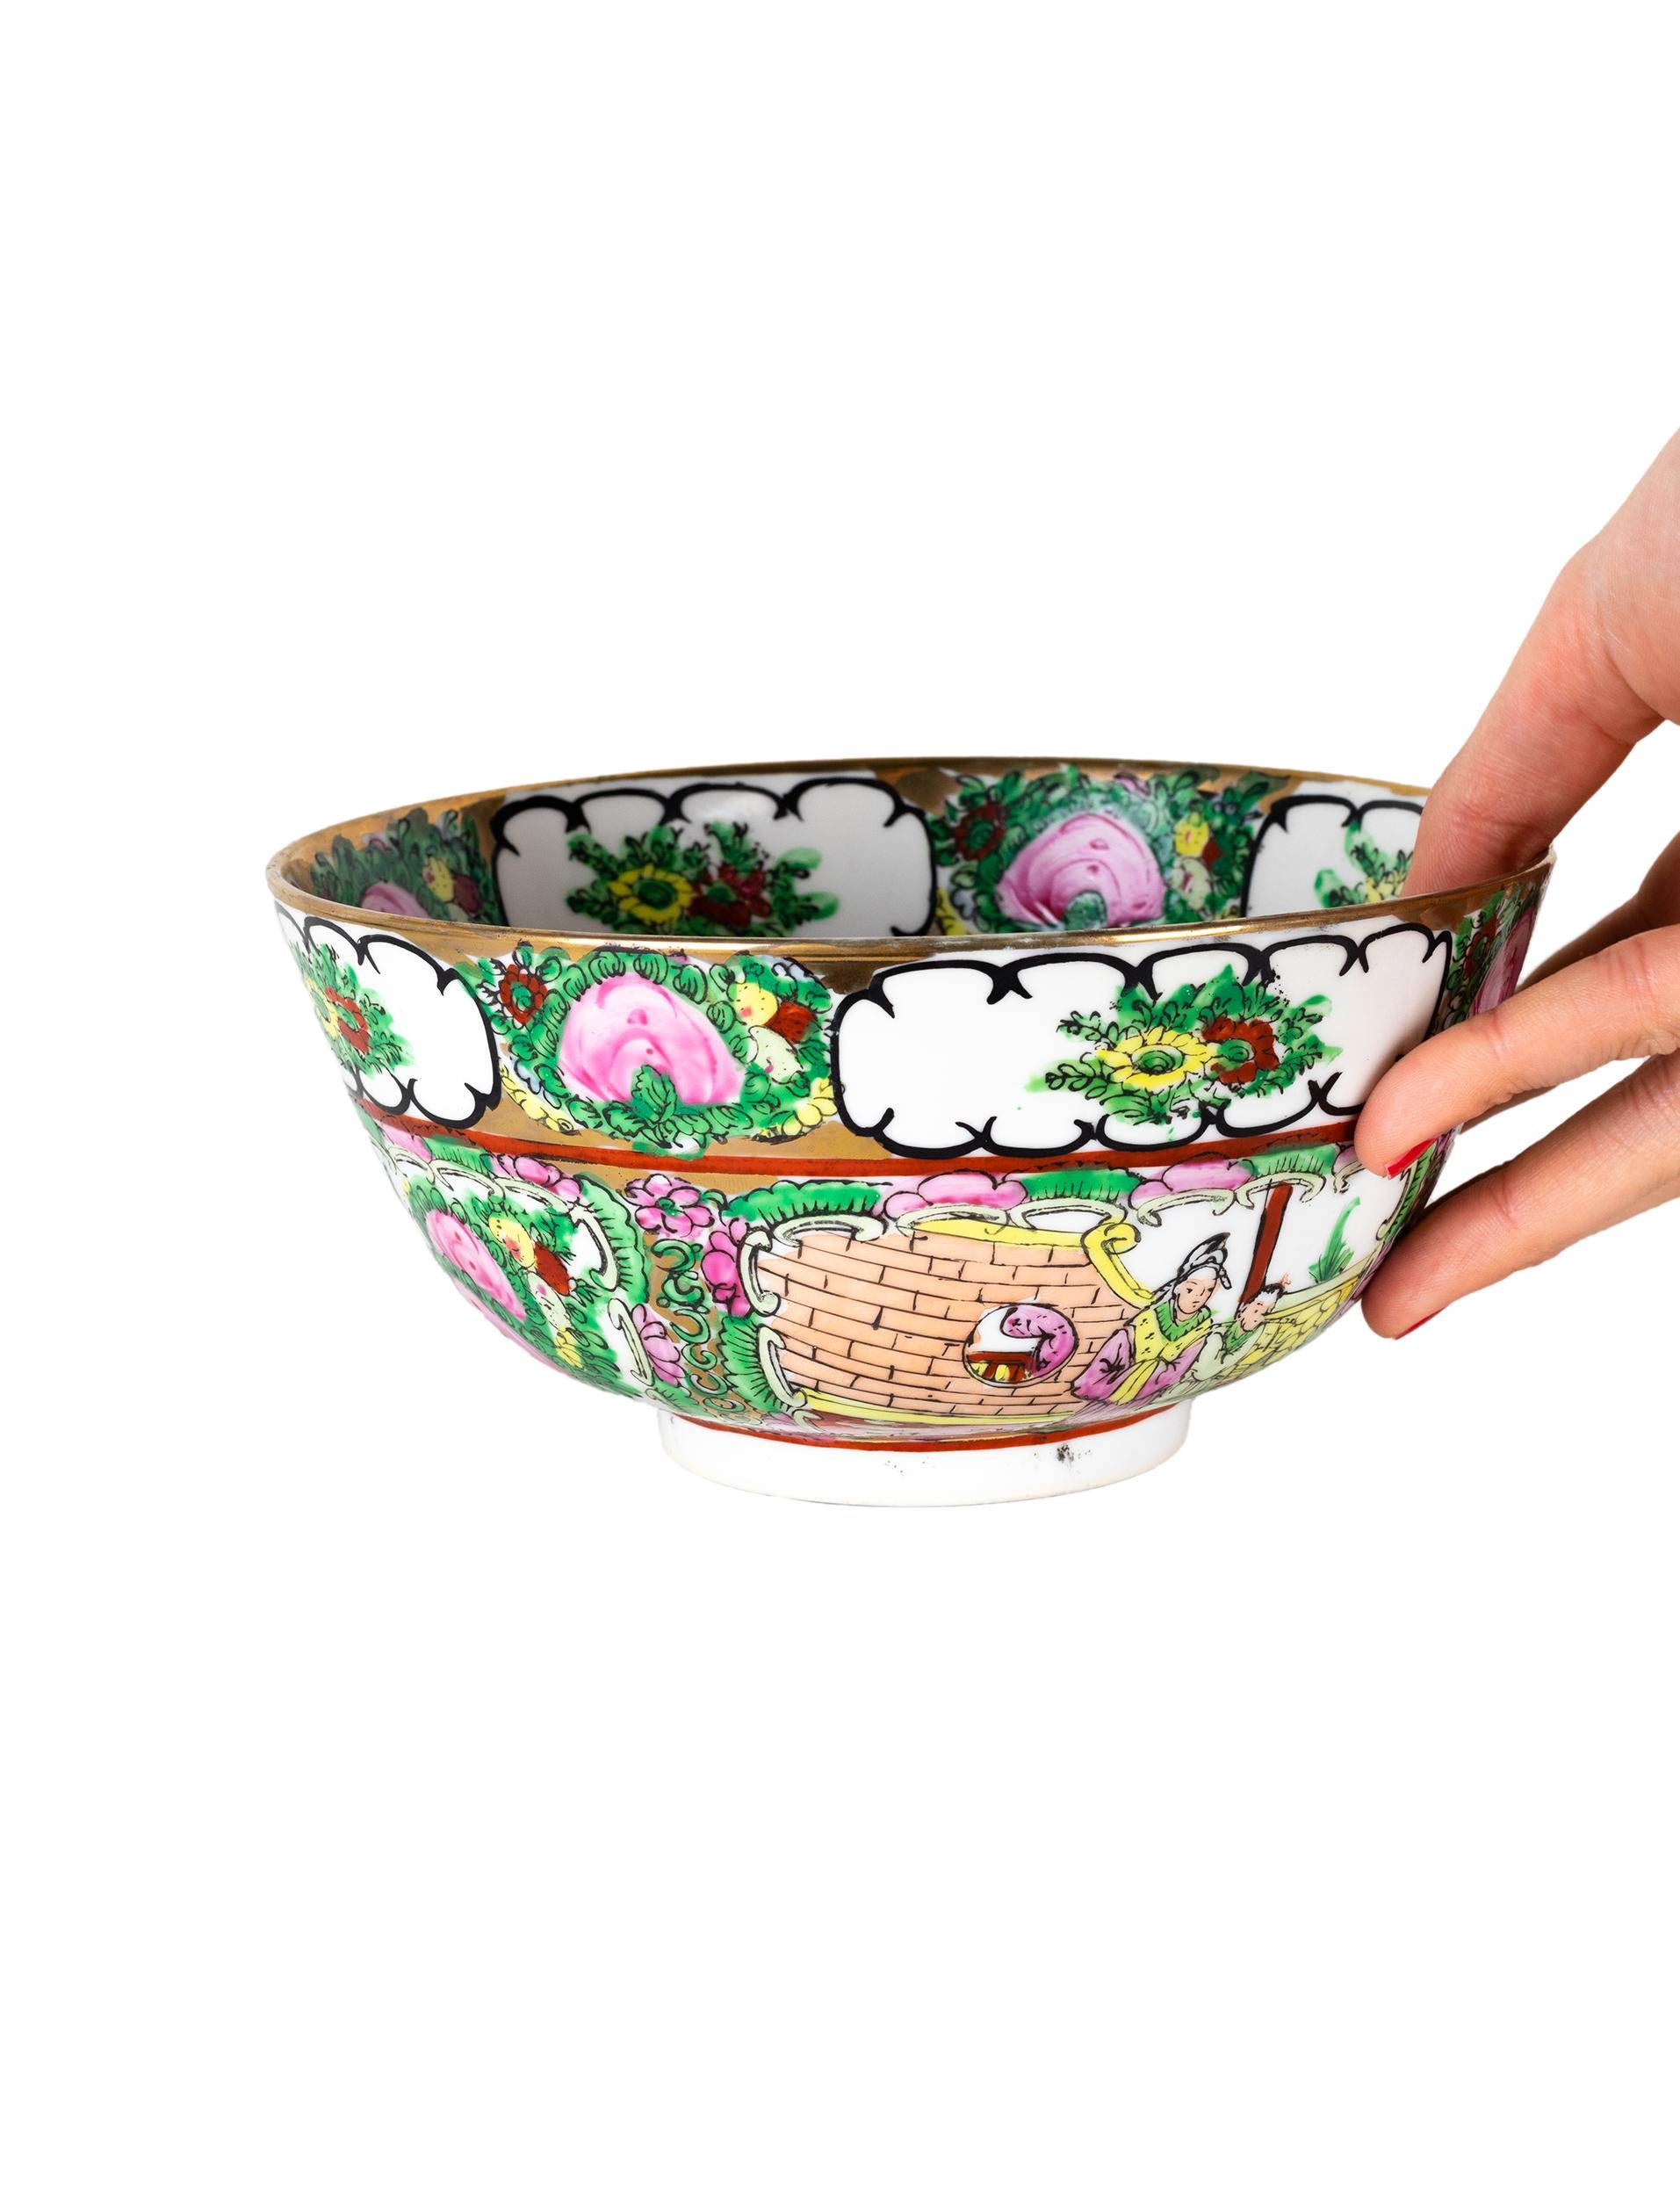 A Chinese Export macanese porcelain rice bowl with the mark 'Fabricado em Macau' (Made in Macau) .with pink and green colours, golden trim and floral design.